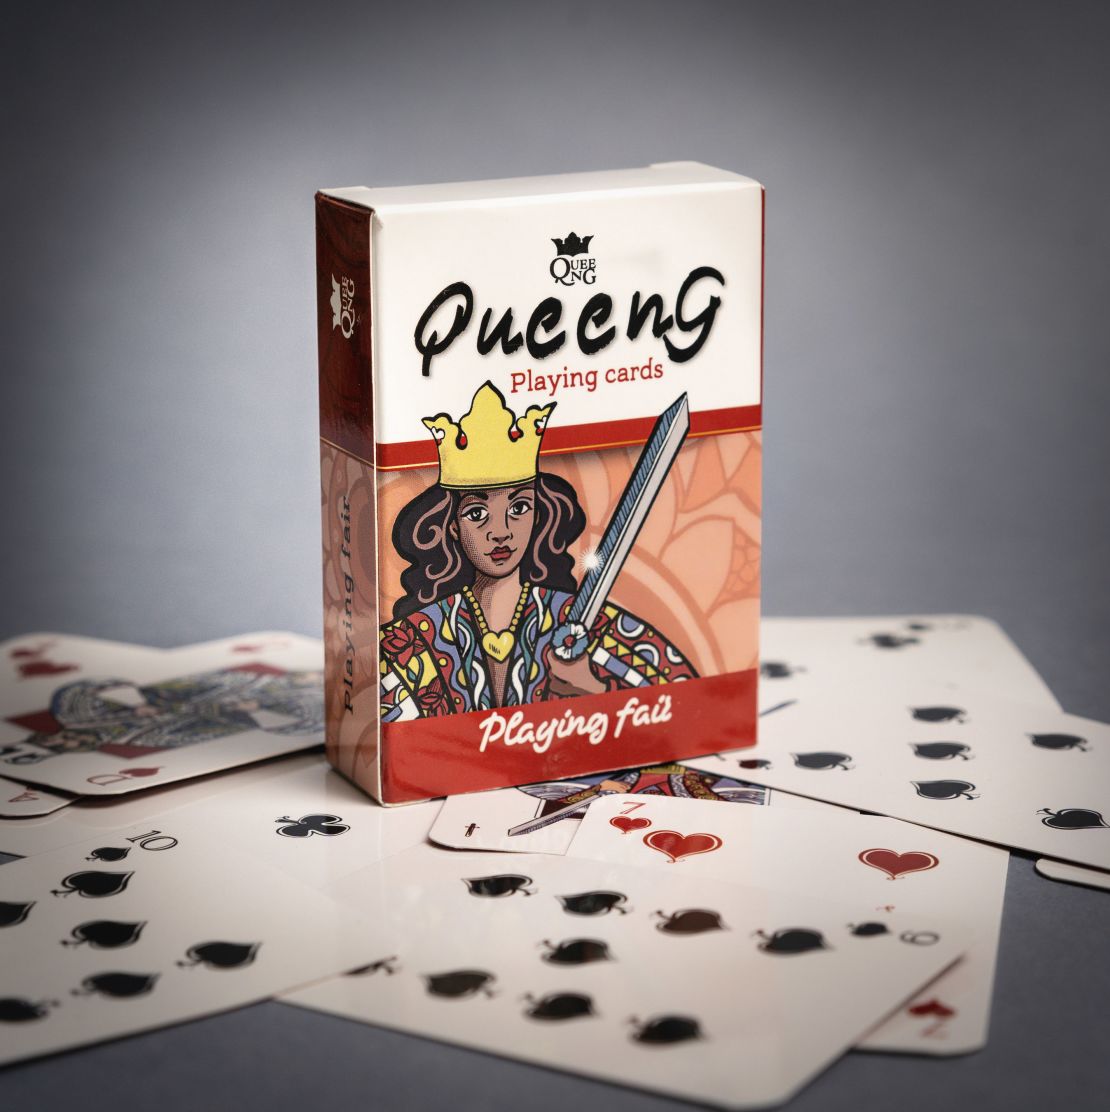 The Queeng Playing Cards: 2nd Edition deck.